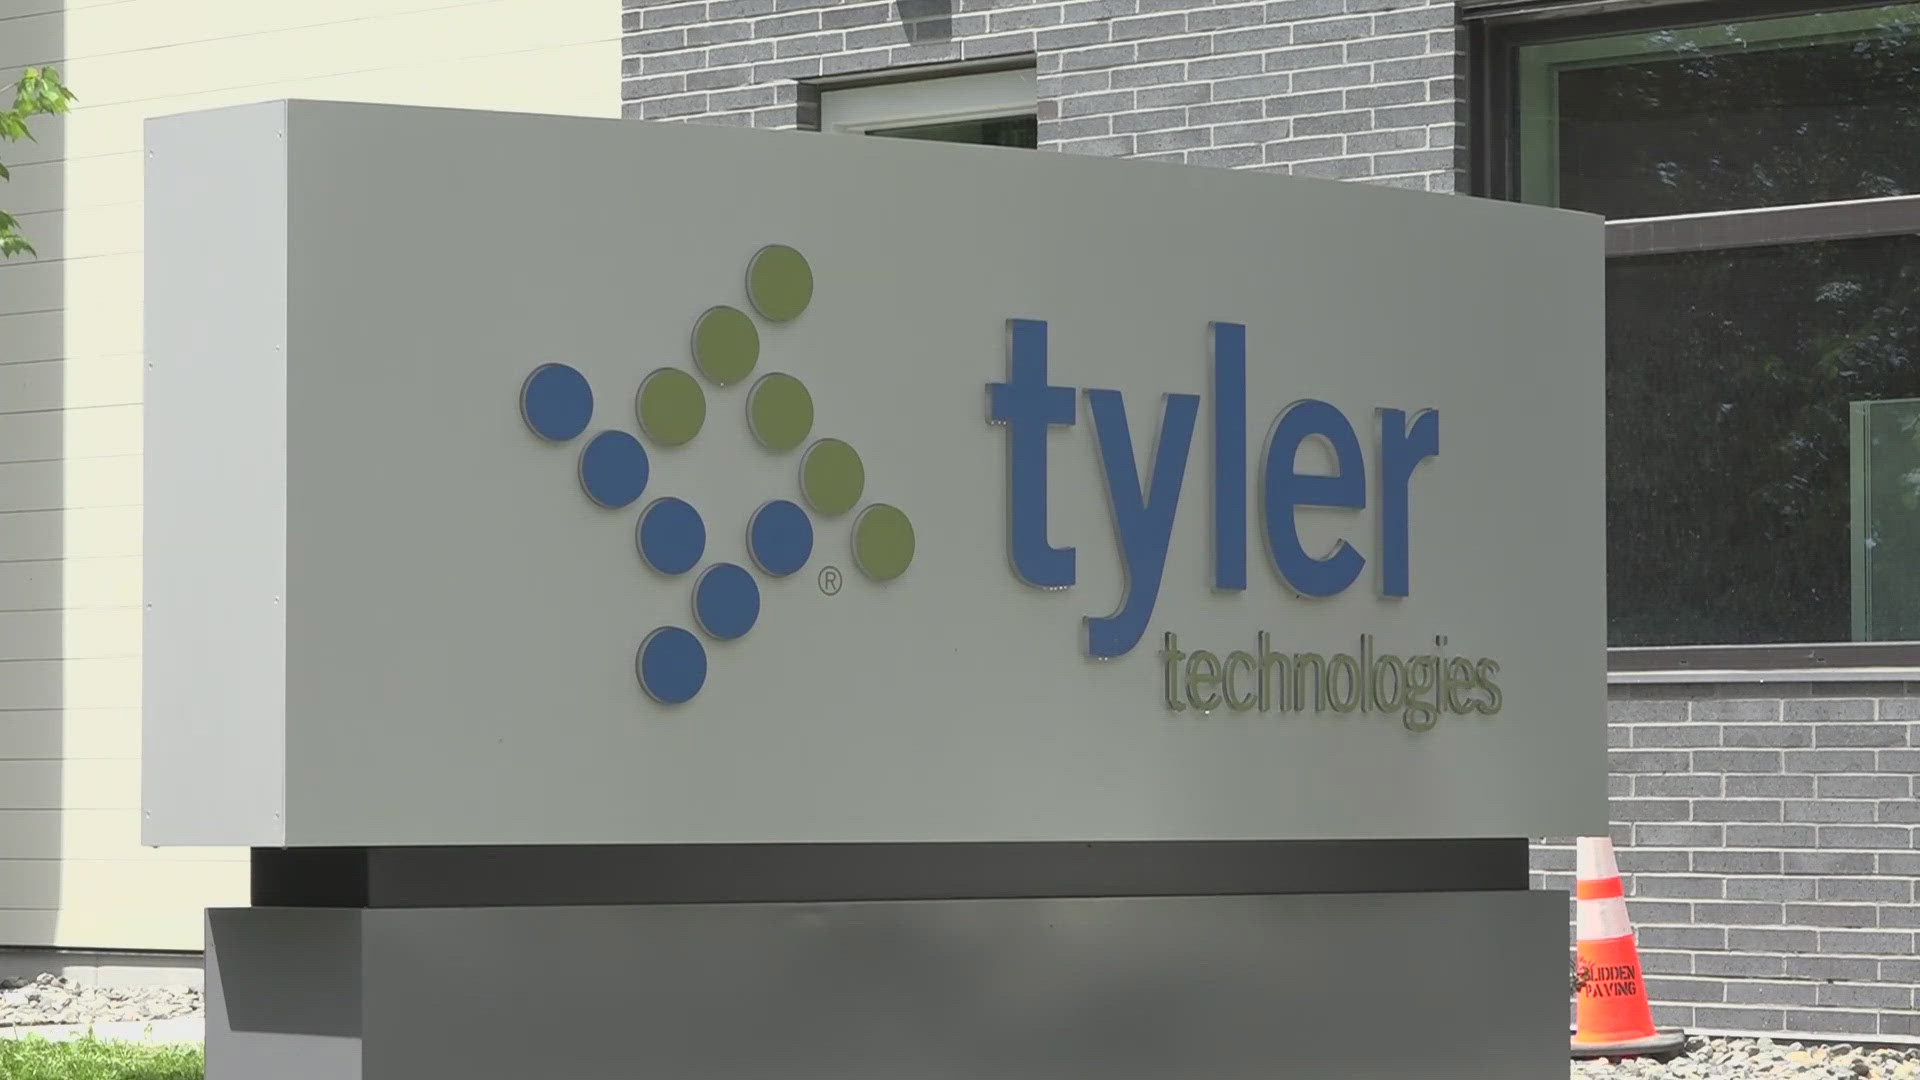 Tyler Technologies' newest facility in Orono brings yearlong internships, opportunities for research, and new jobs to the university area.